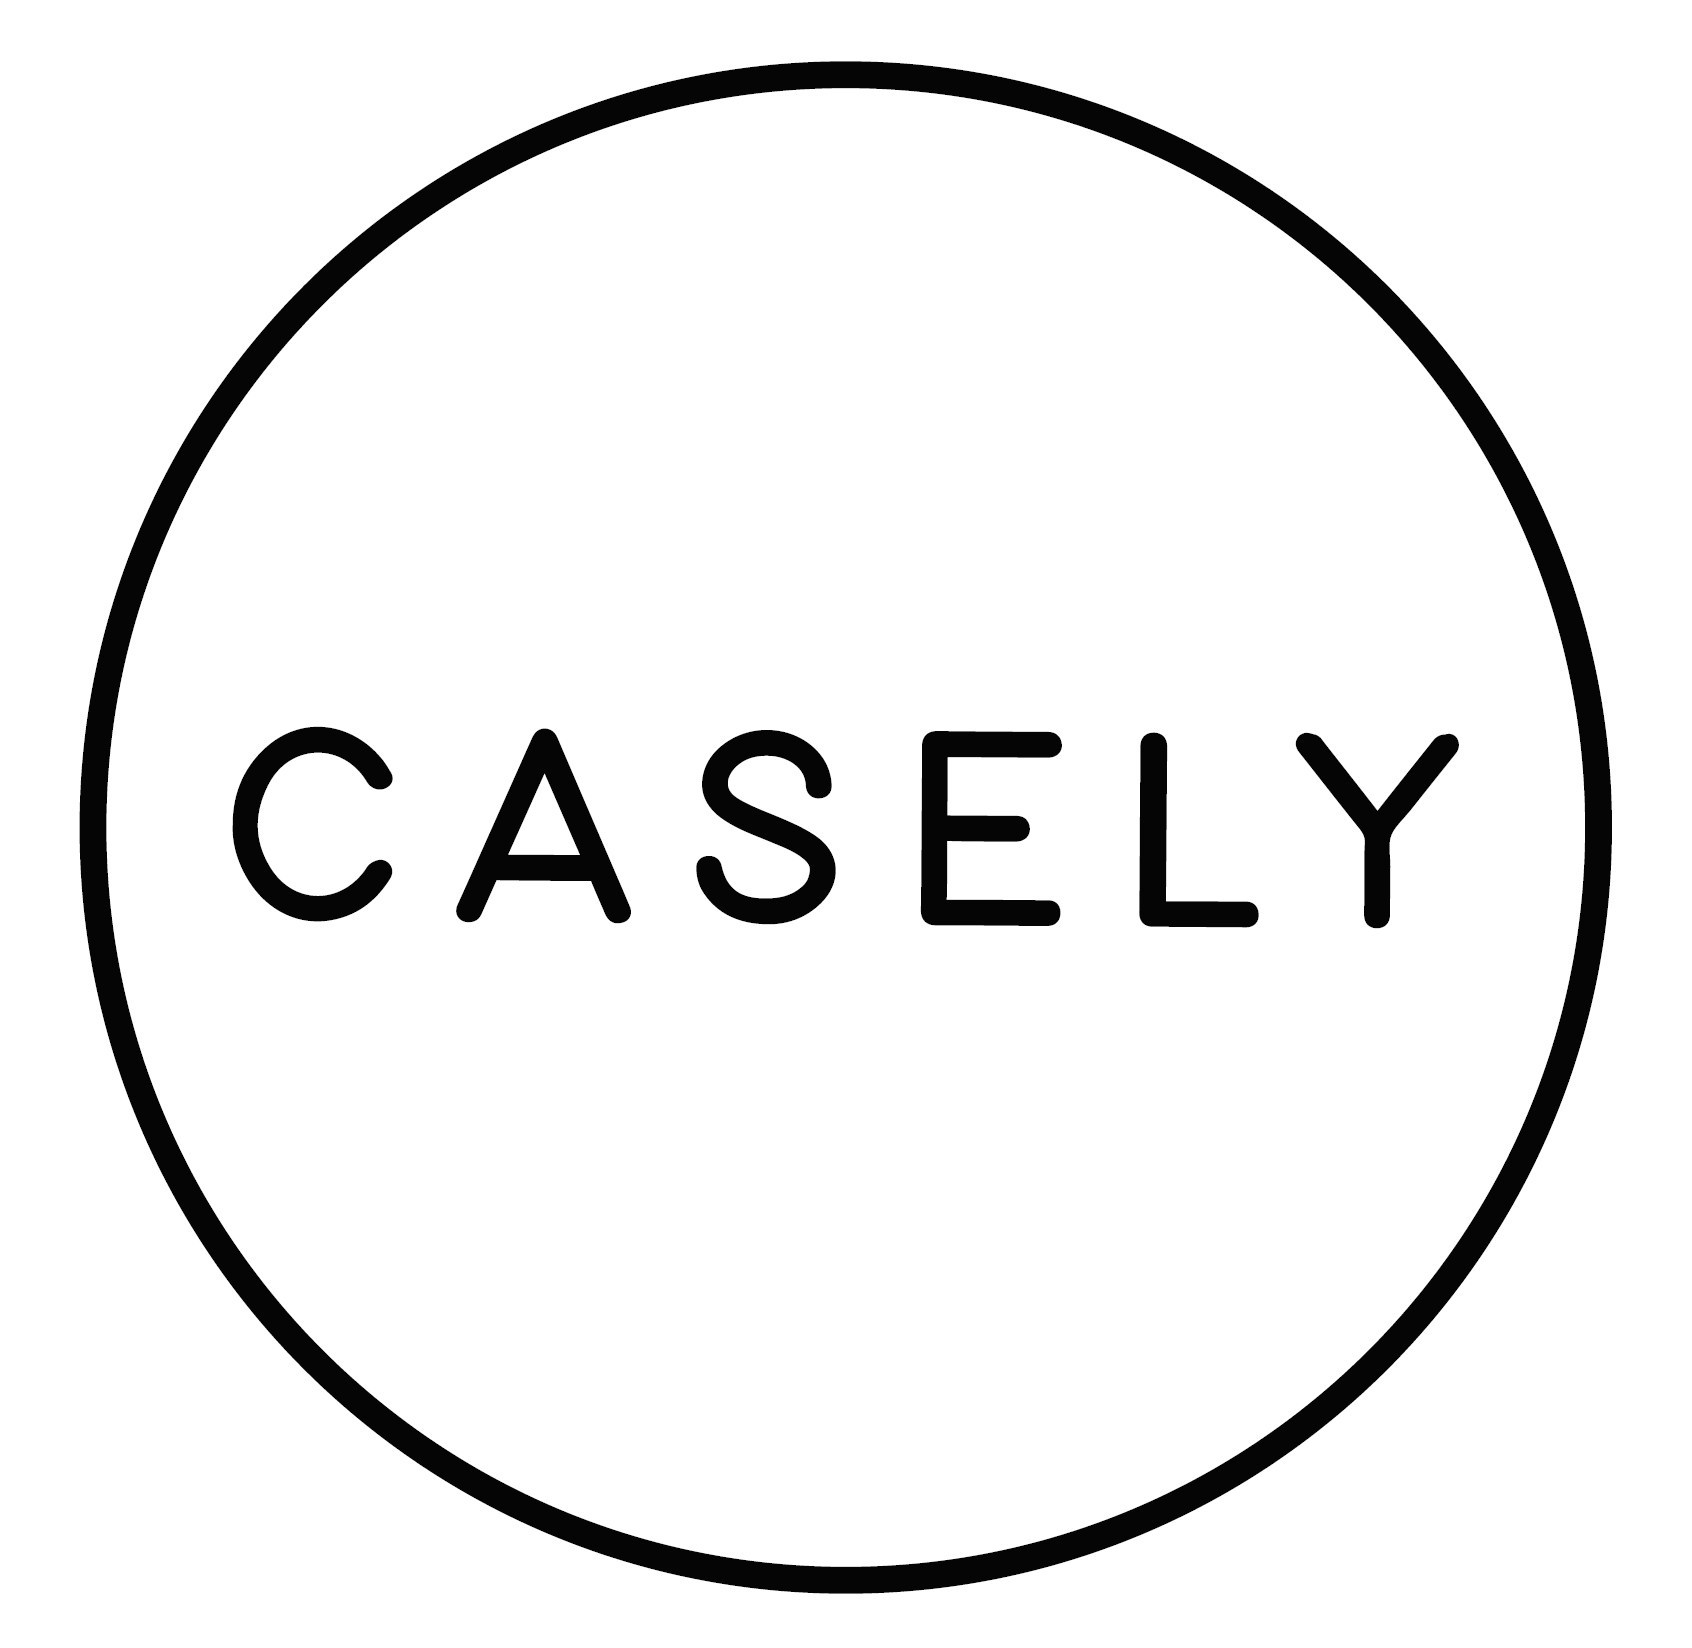 30% Off With Casely Promotion